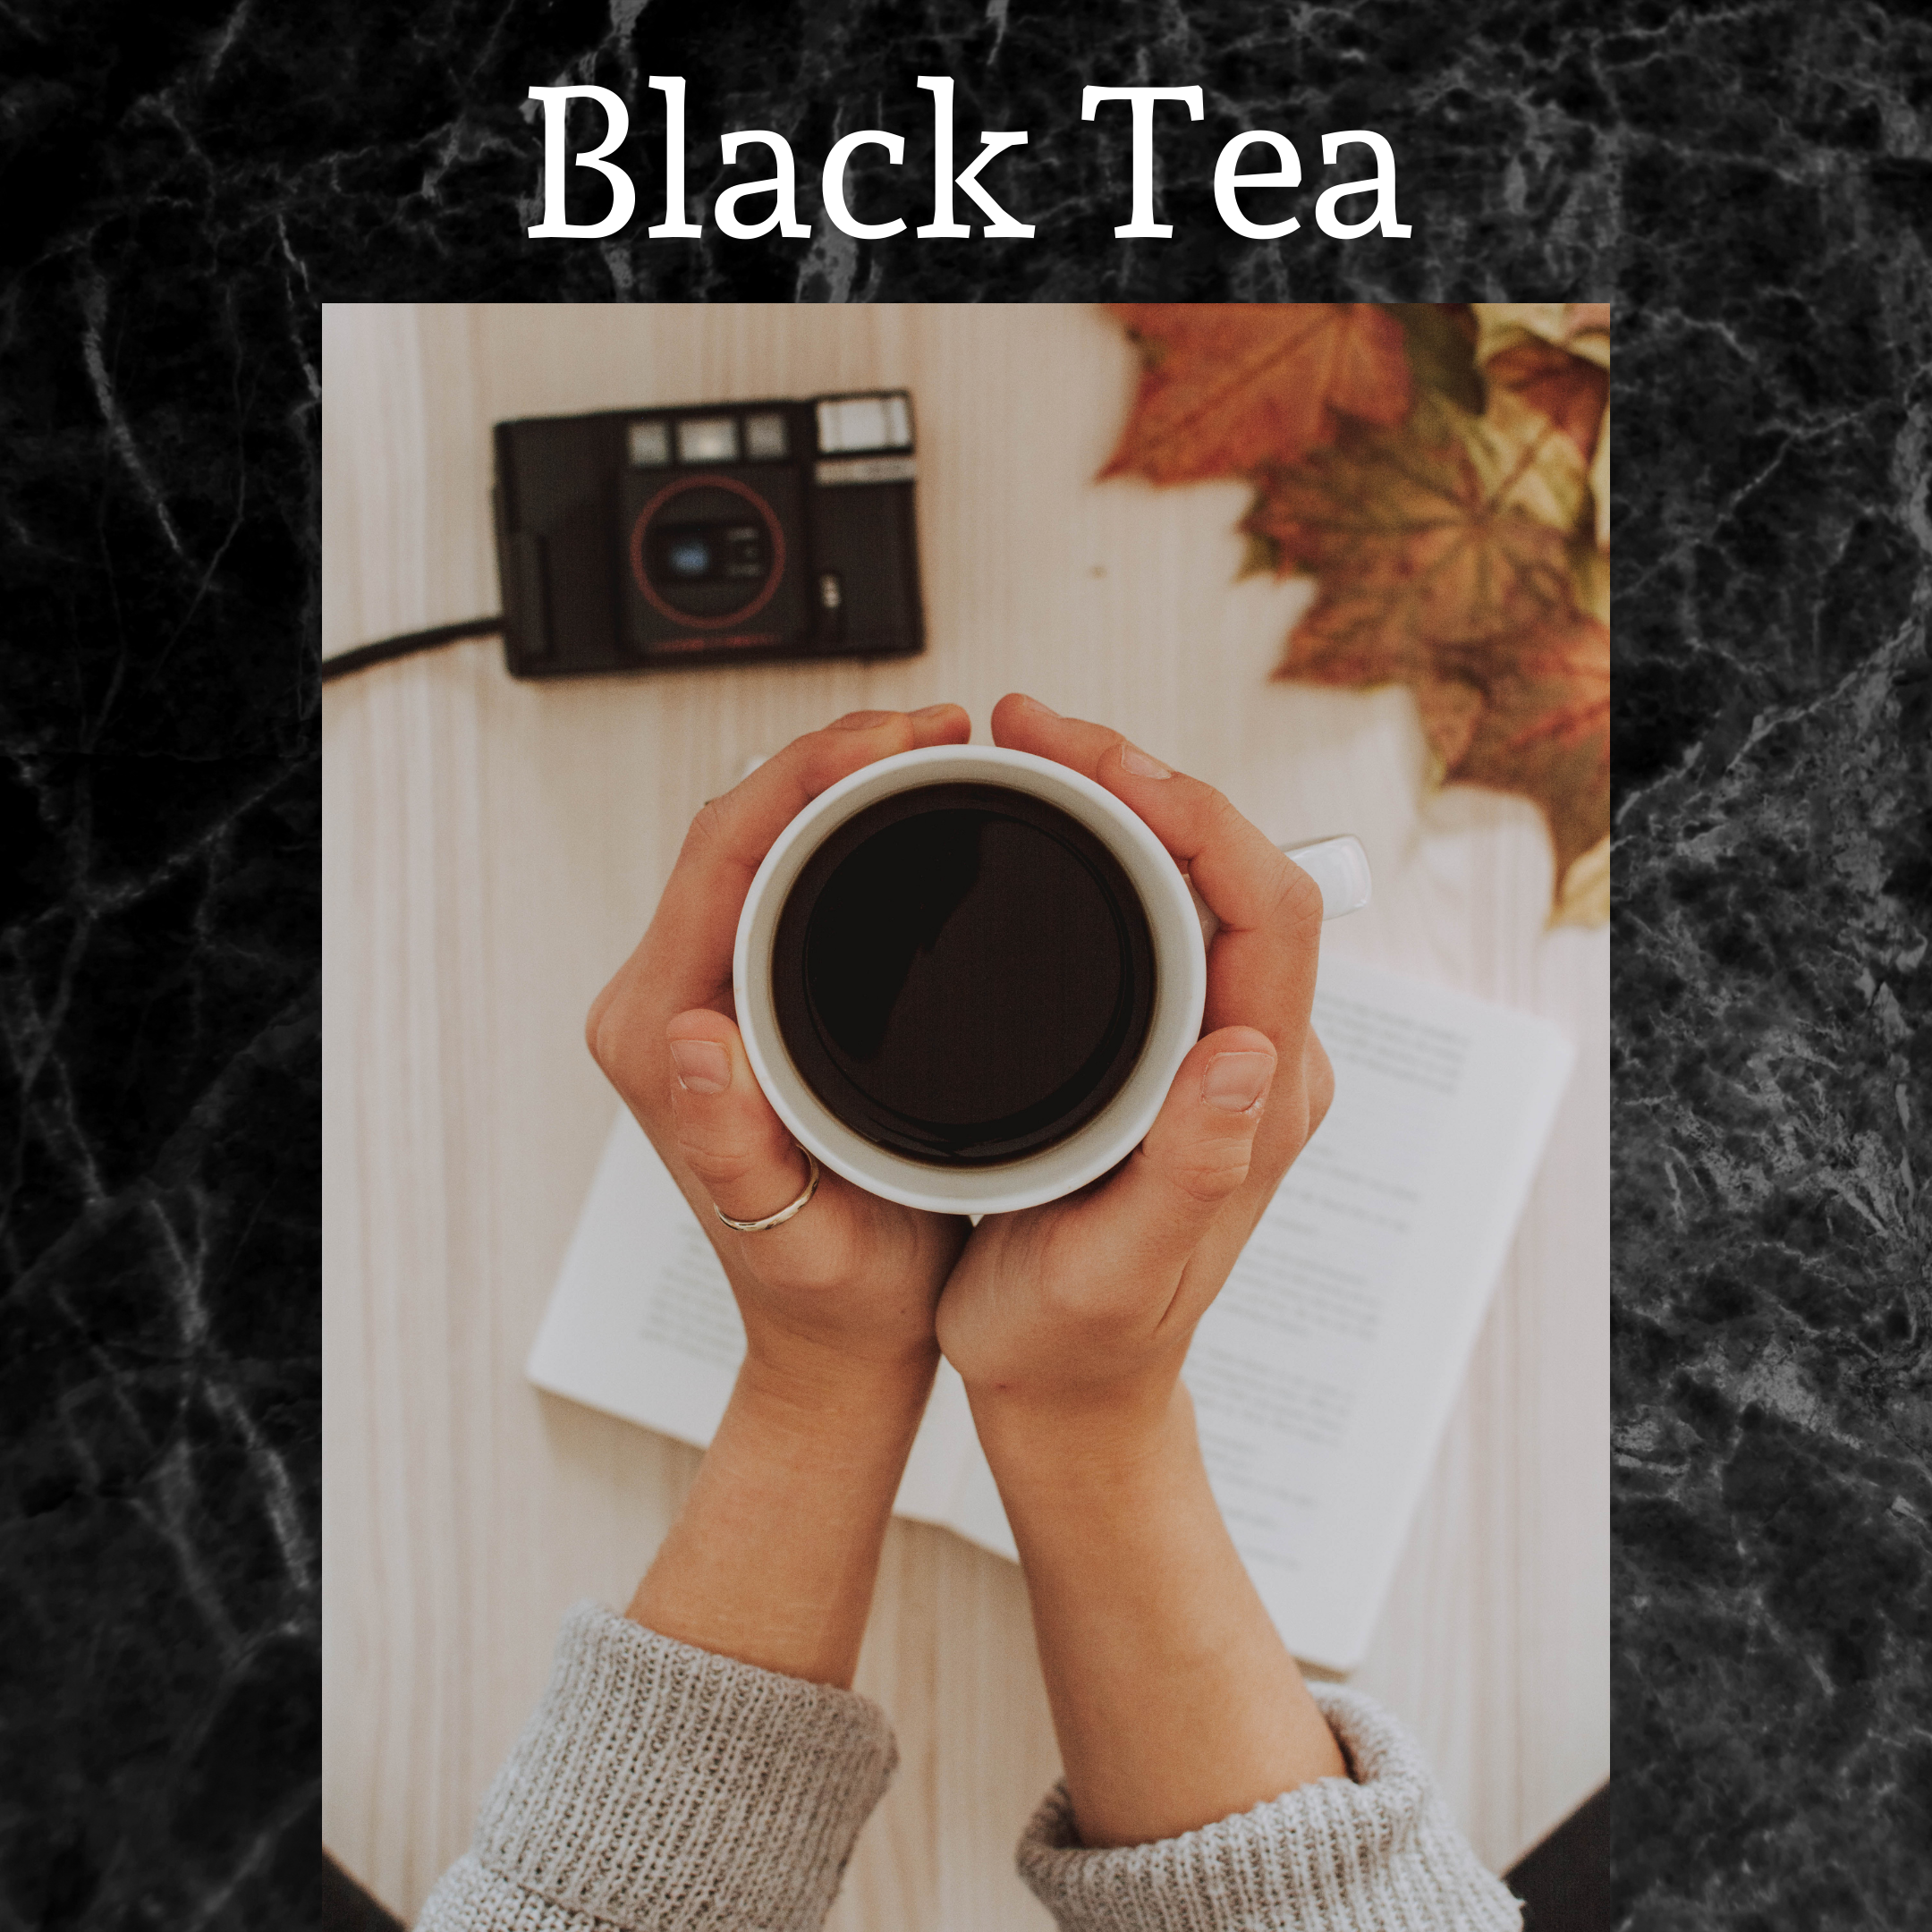 Black tea, lady holding a cup